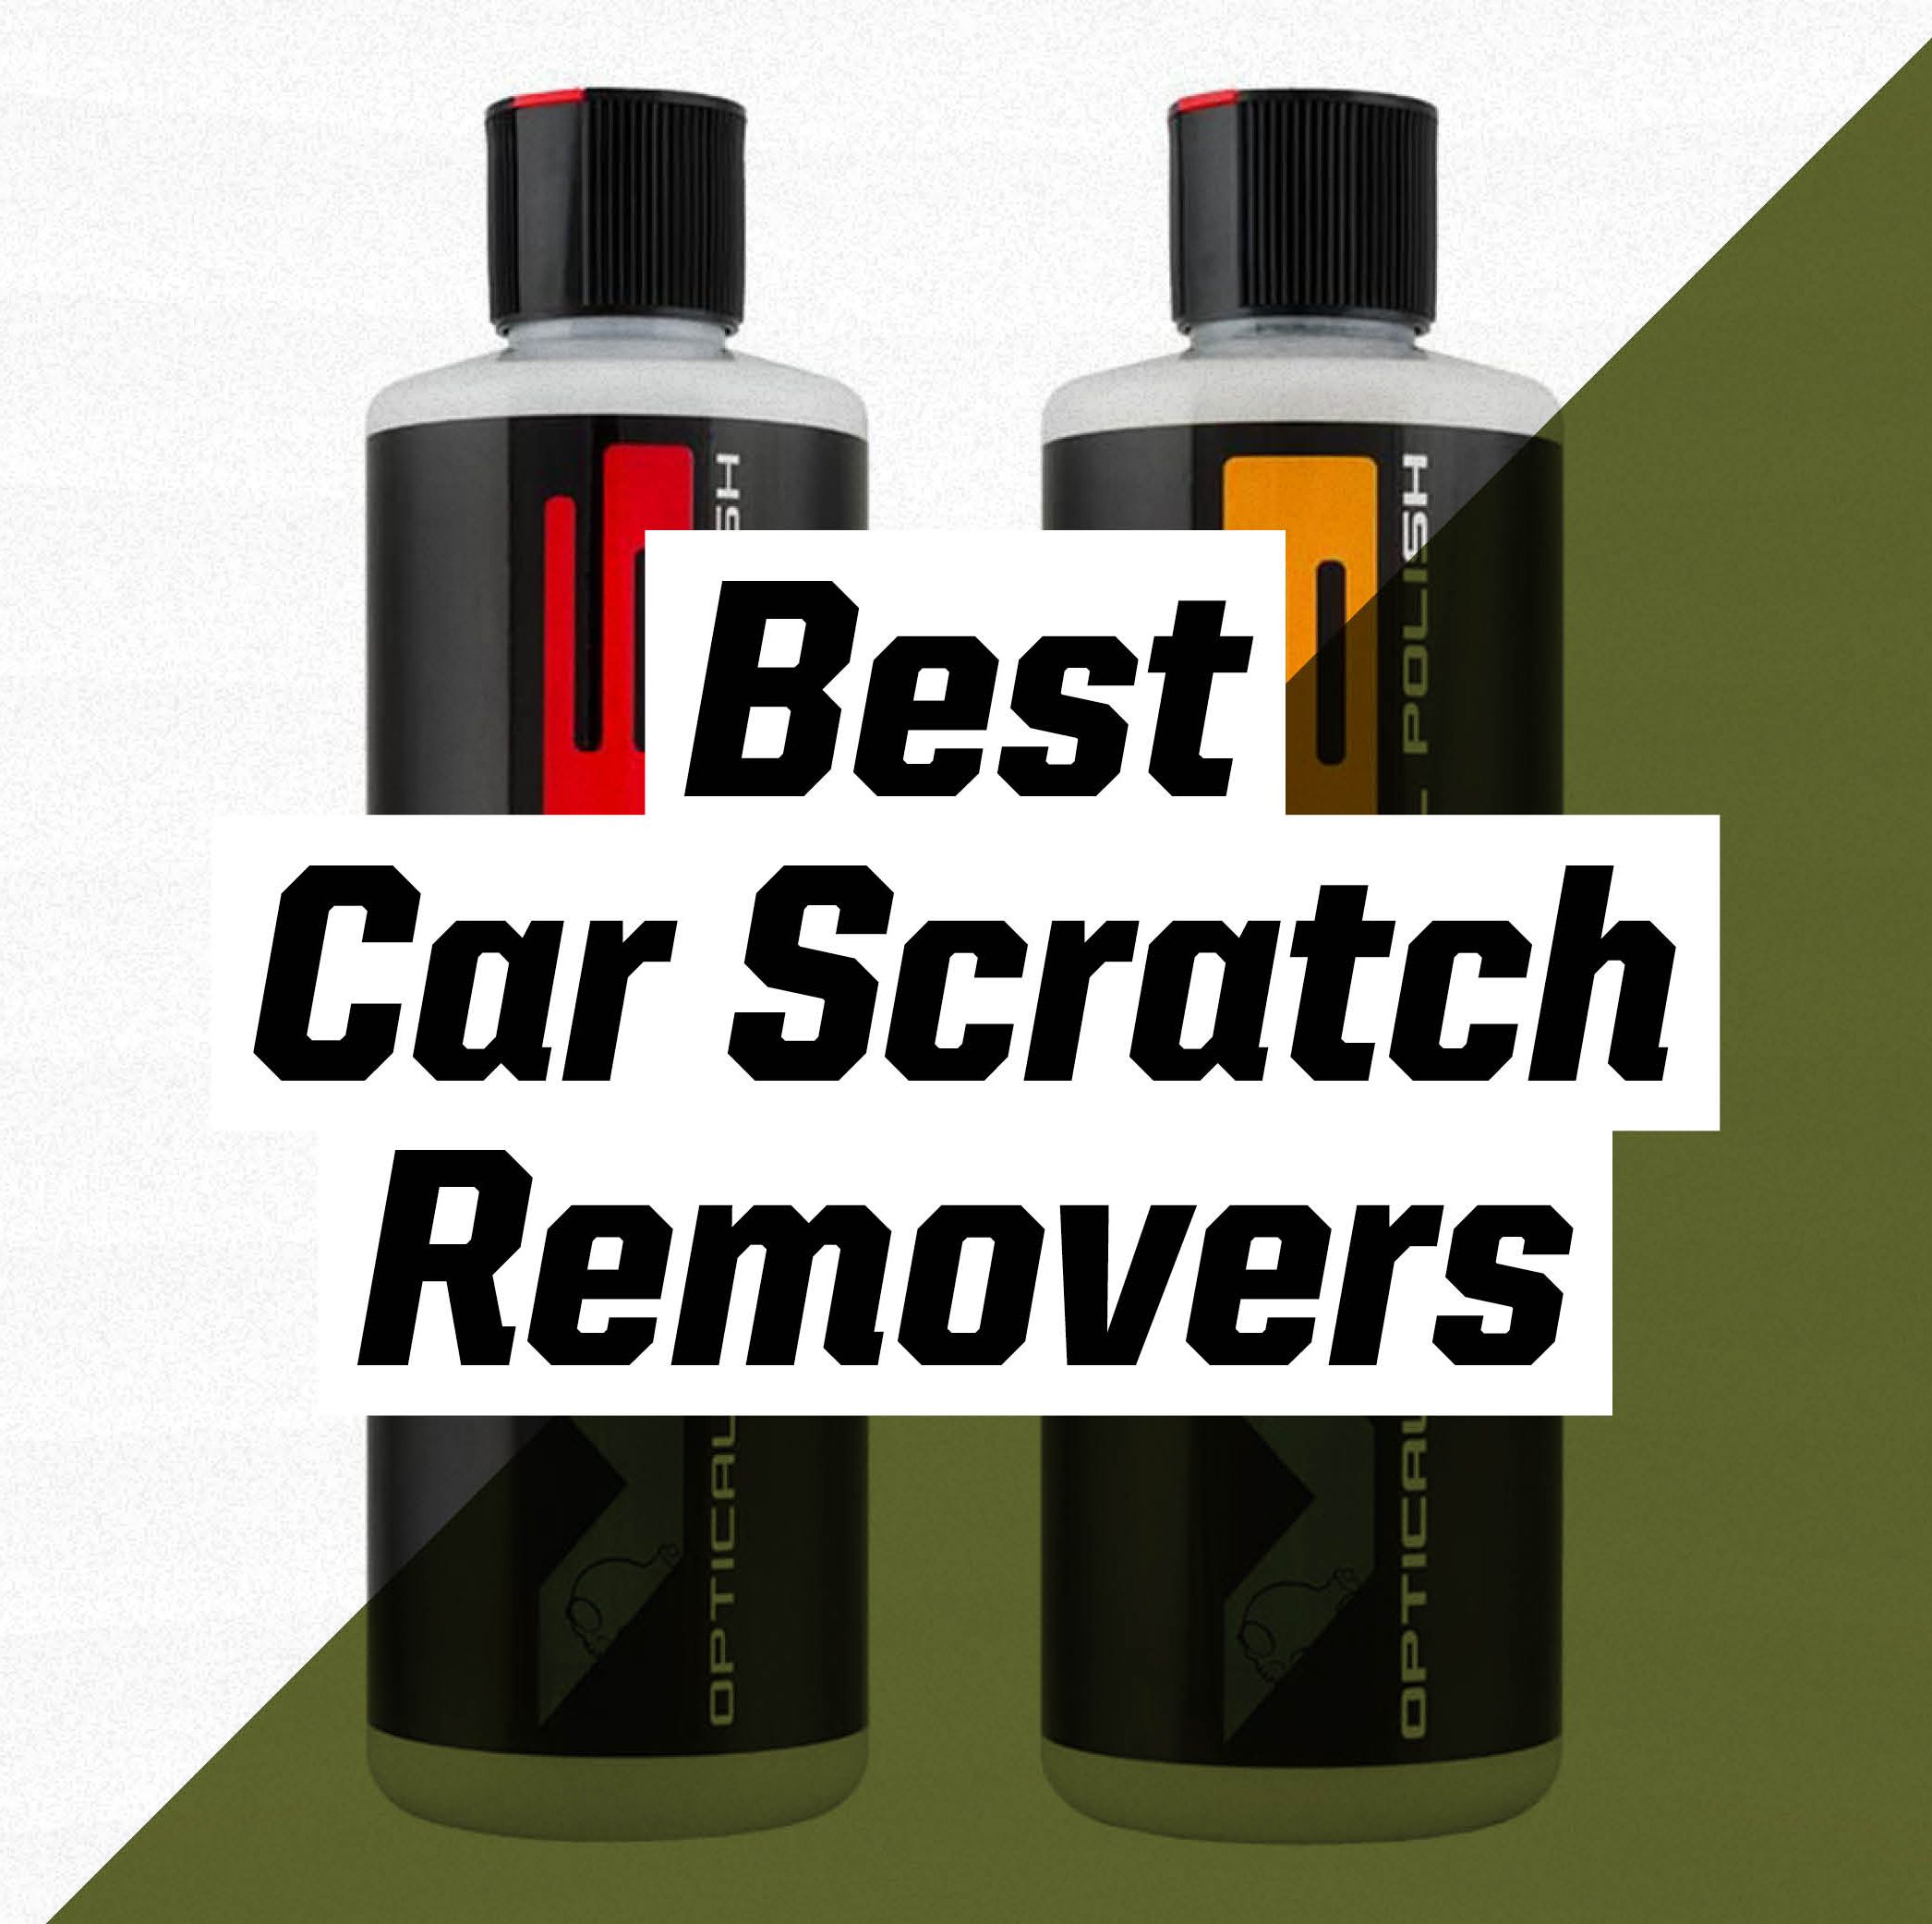 Restore Your Car With the Best Car Scratch Removers and Polishes